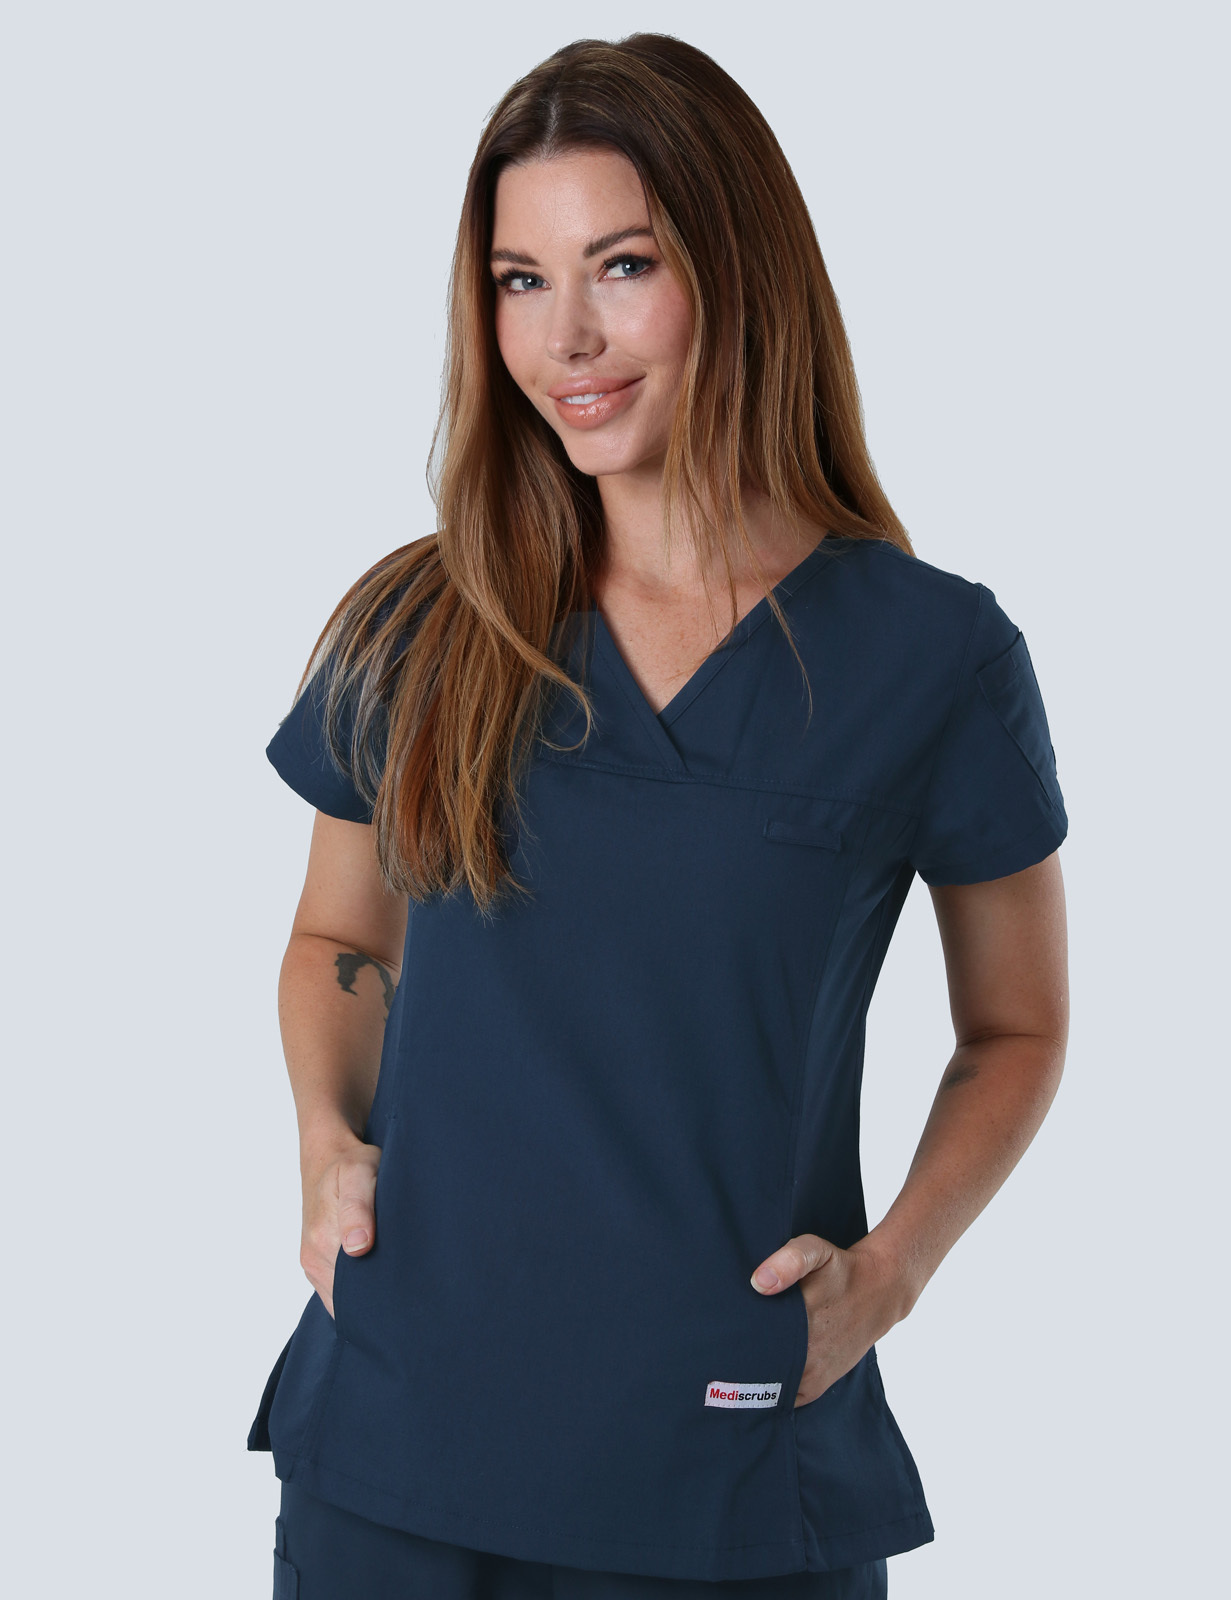 Logan Hospital - ICU CN (Women's Fit Solid Scrub Top and Cargo Pants in Navy incl Logos)